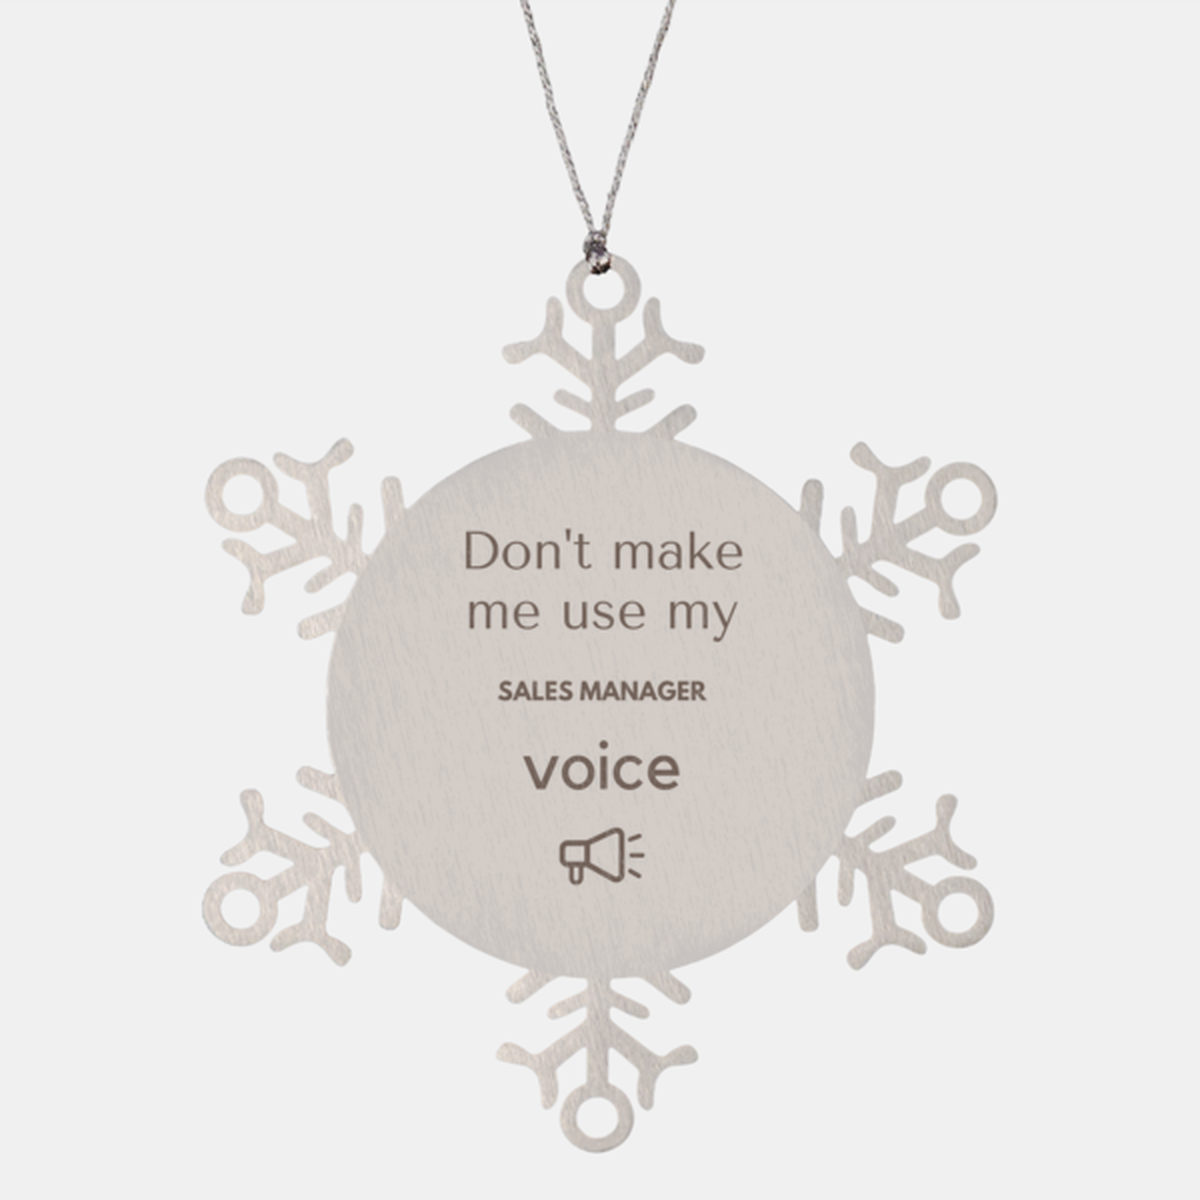 Don't make me use my Sales Manager voice, Sarcasm Sales Manager Ornament Gifts, Christmas Sales Manager Snowflake Ornament Unique Gifts For Sales Manager Coworkers, Men, Women, Colleague, Friends